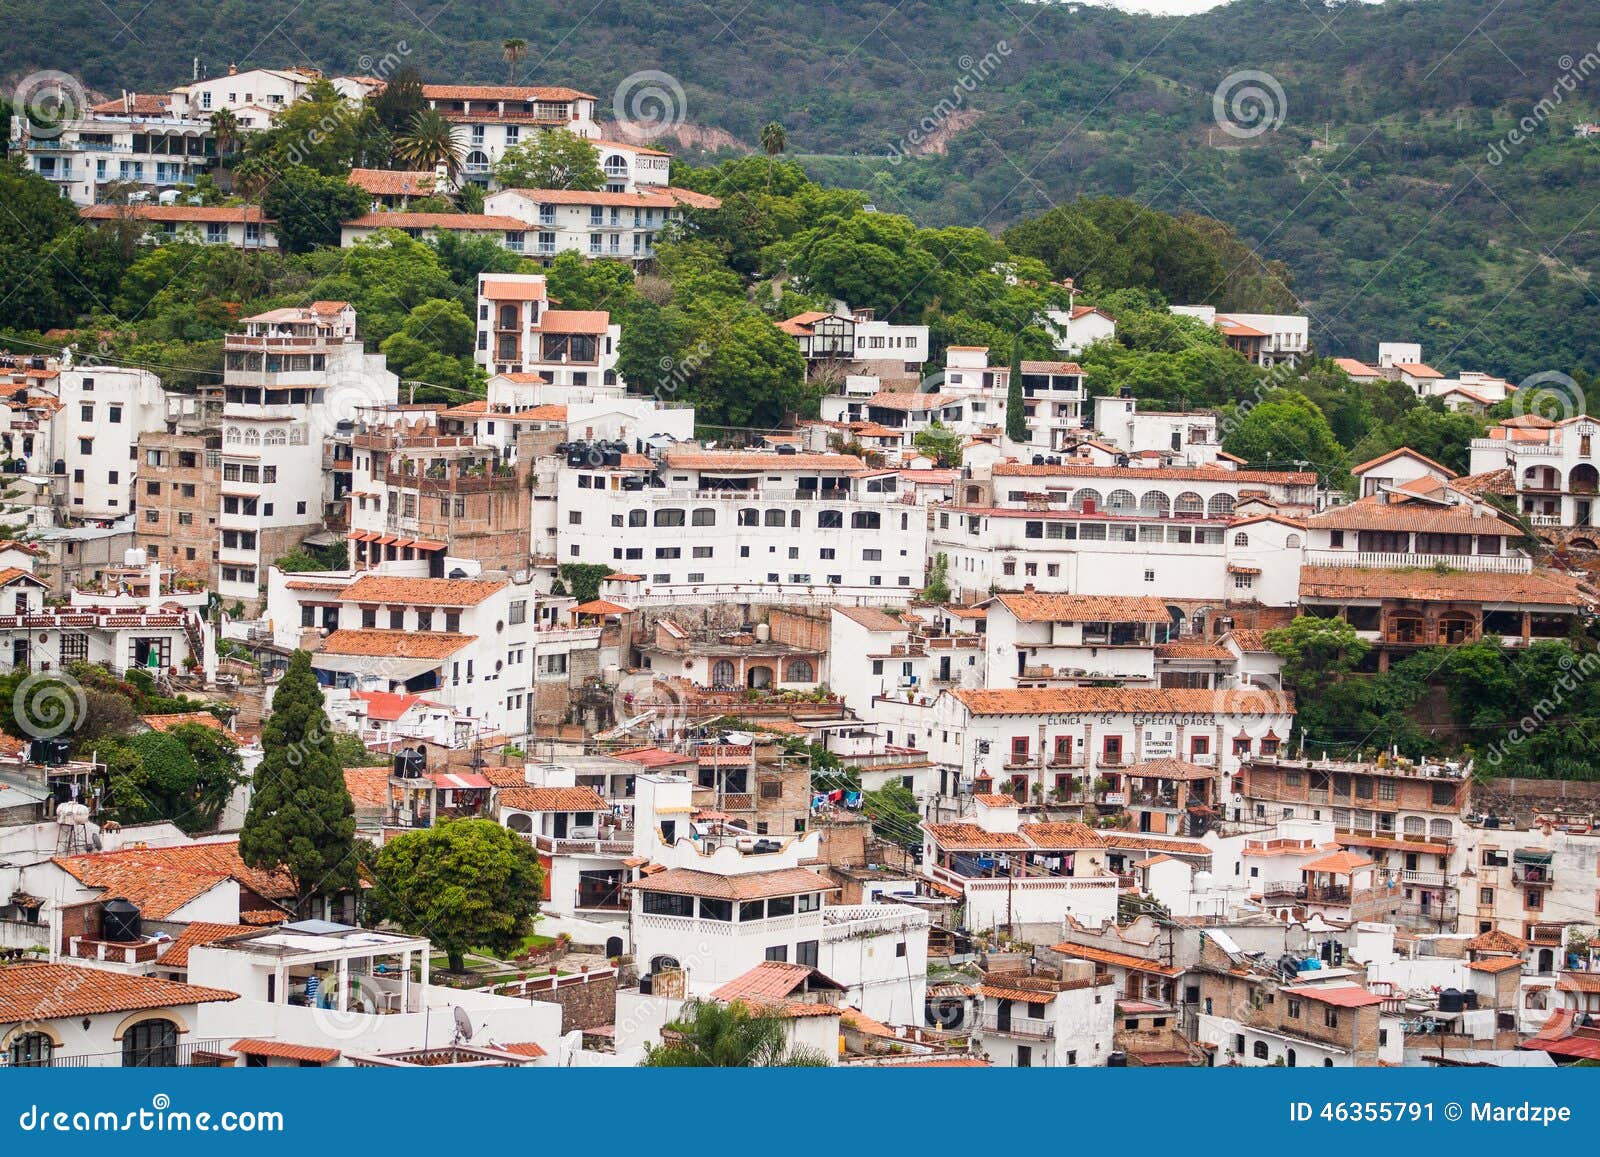 picture of taxco, guerrero a colorful town in mexico.